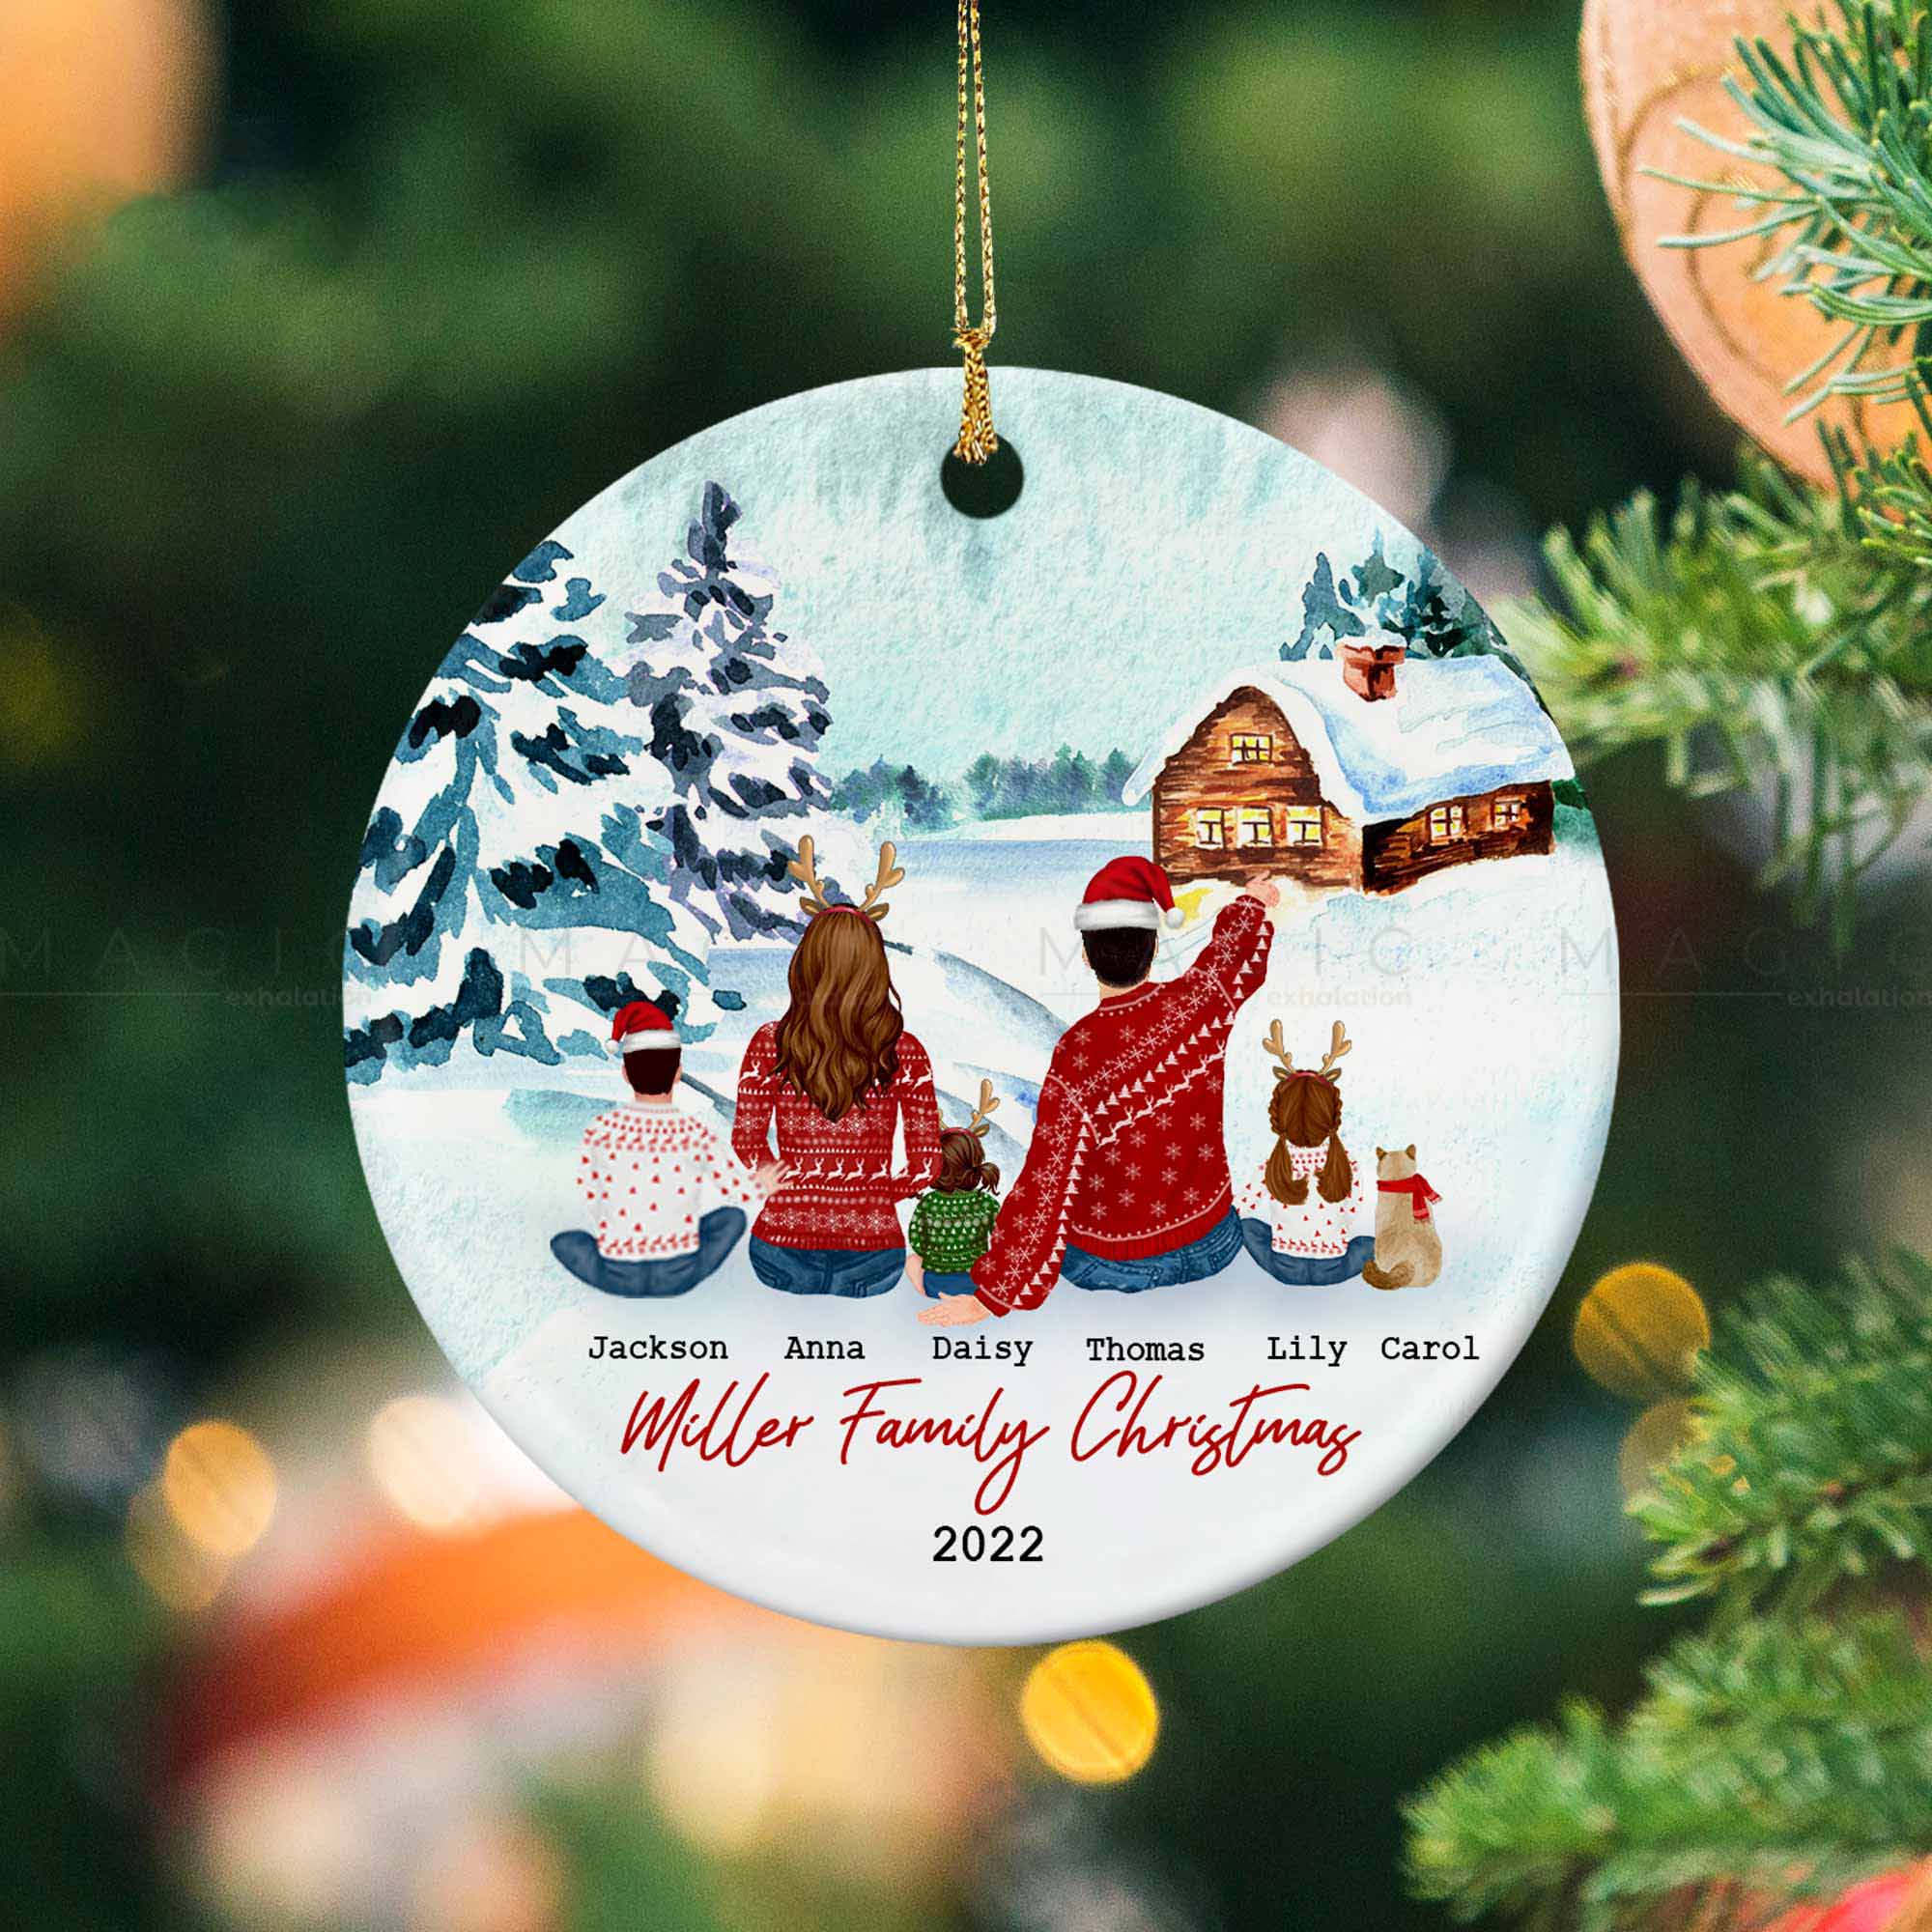 5 Pack Sublimation 3 inch Ceramic Christmas Ornaments